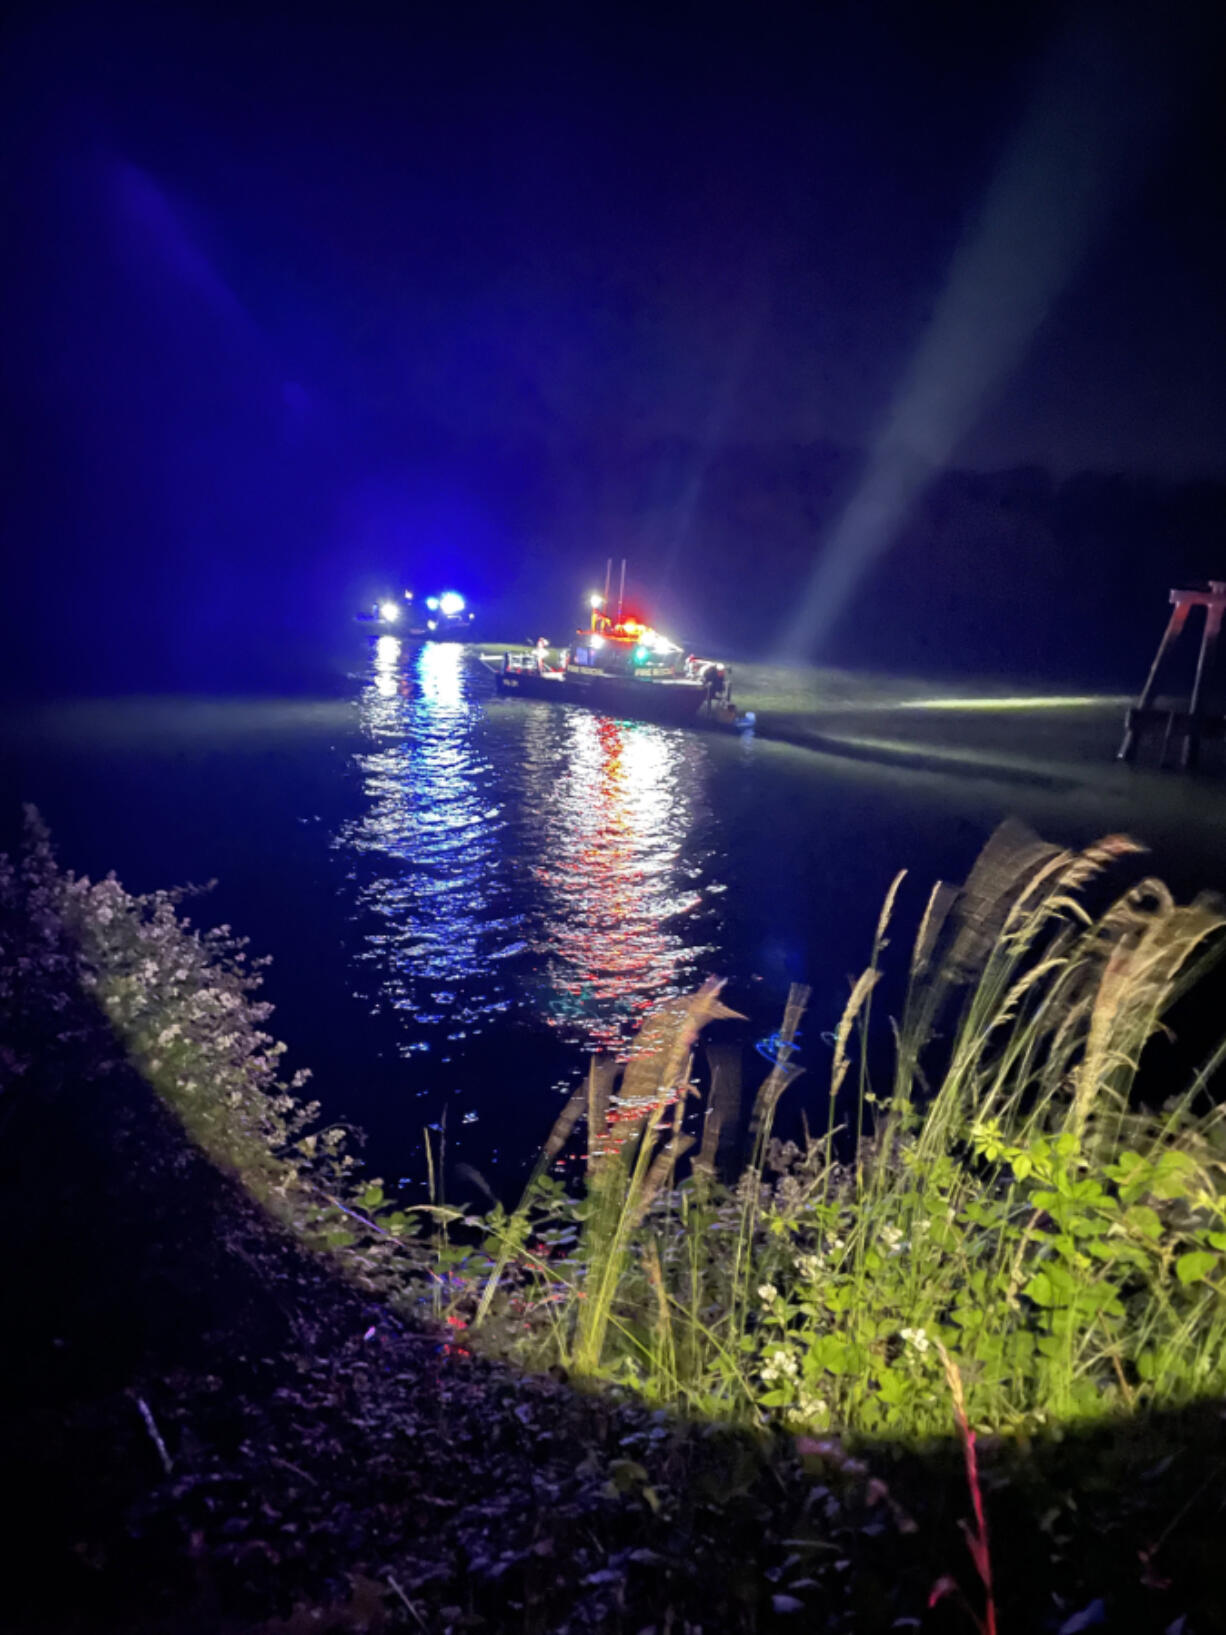 A man and a woman were rescued Monday night from the Columbia River, just inside the Multnomah Channel, after their inner tubes popped while they were in the water. Neither were injured, and both were wearing life jackets.